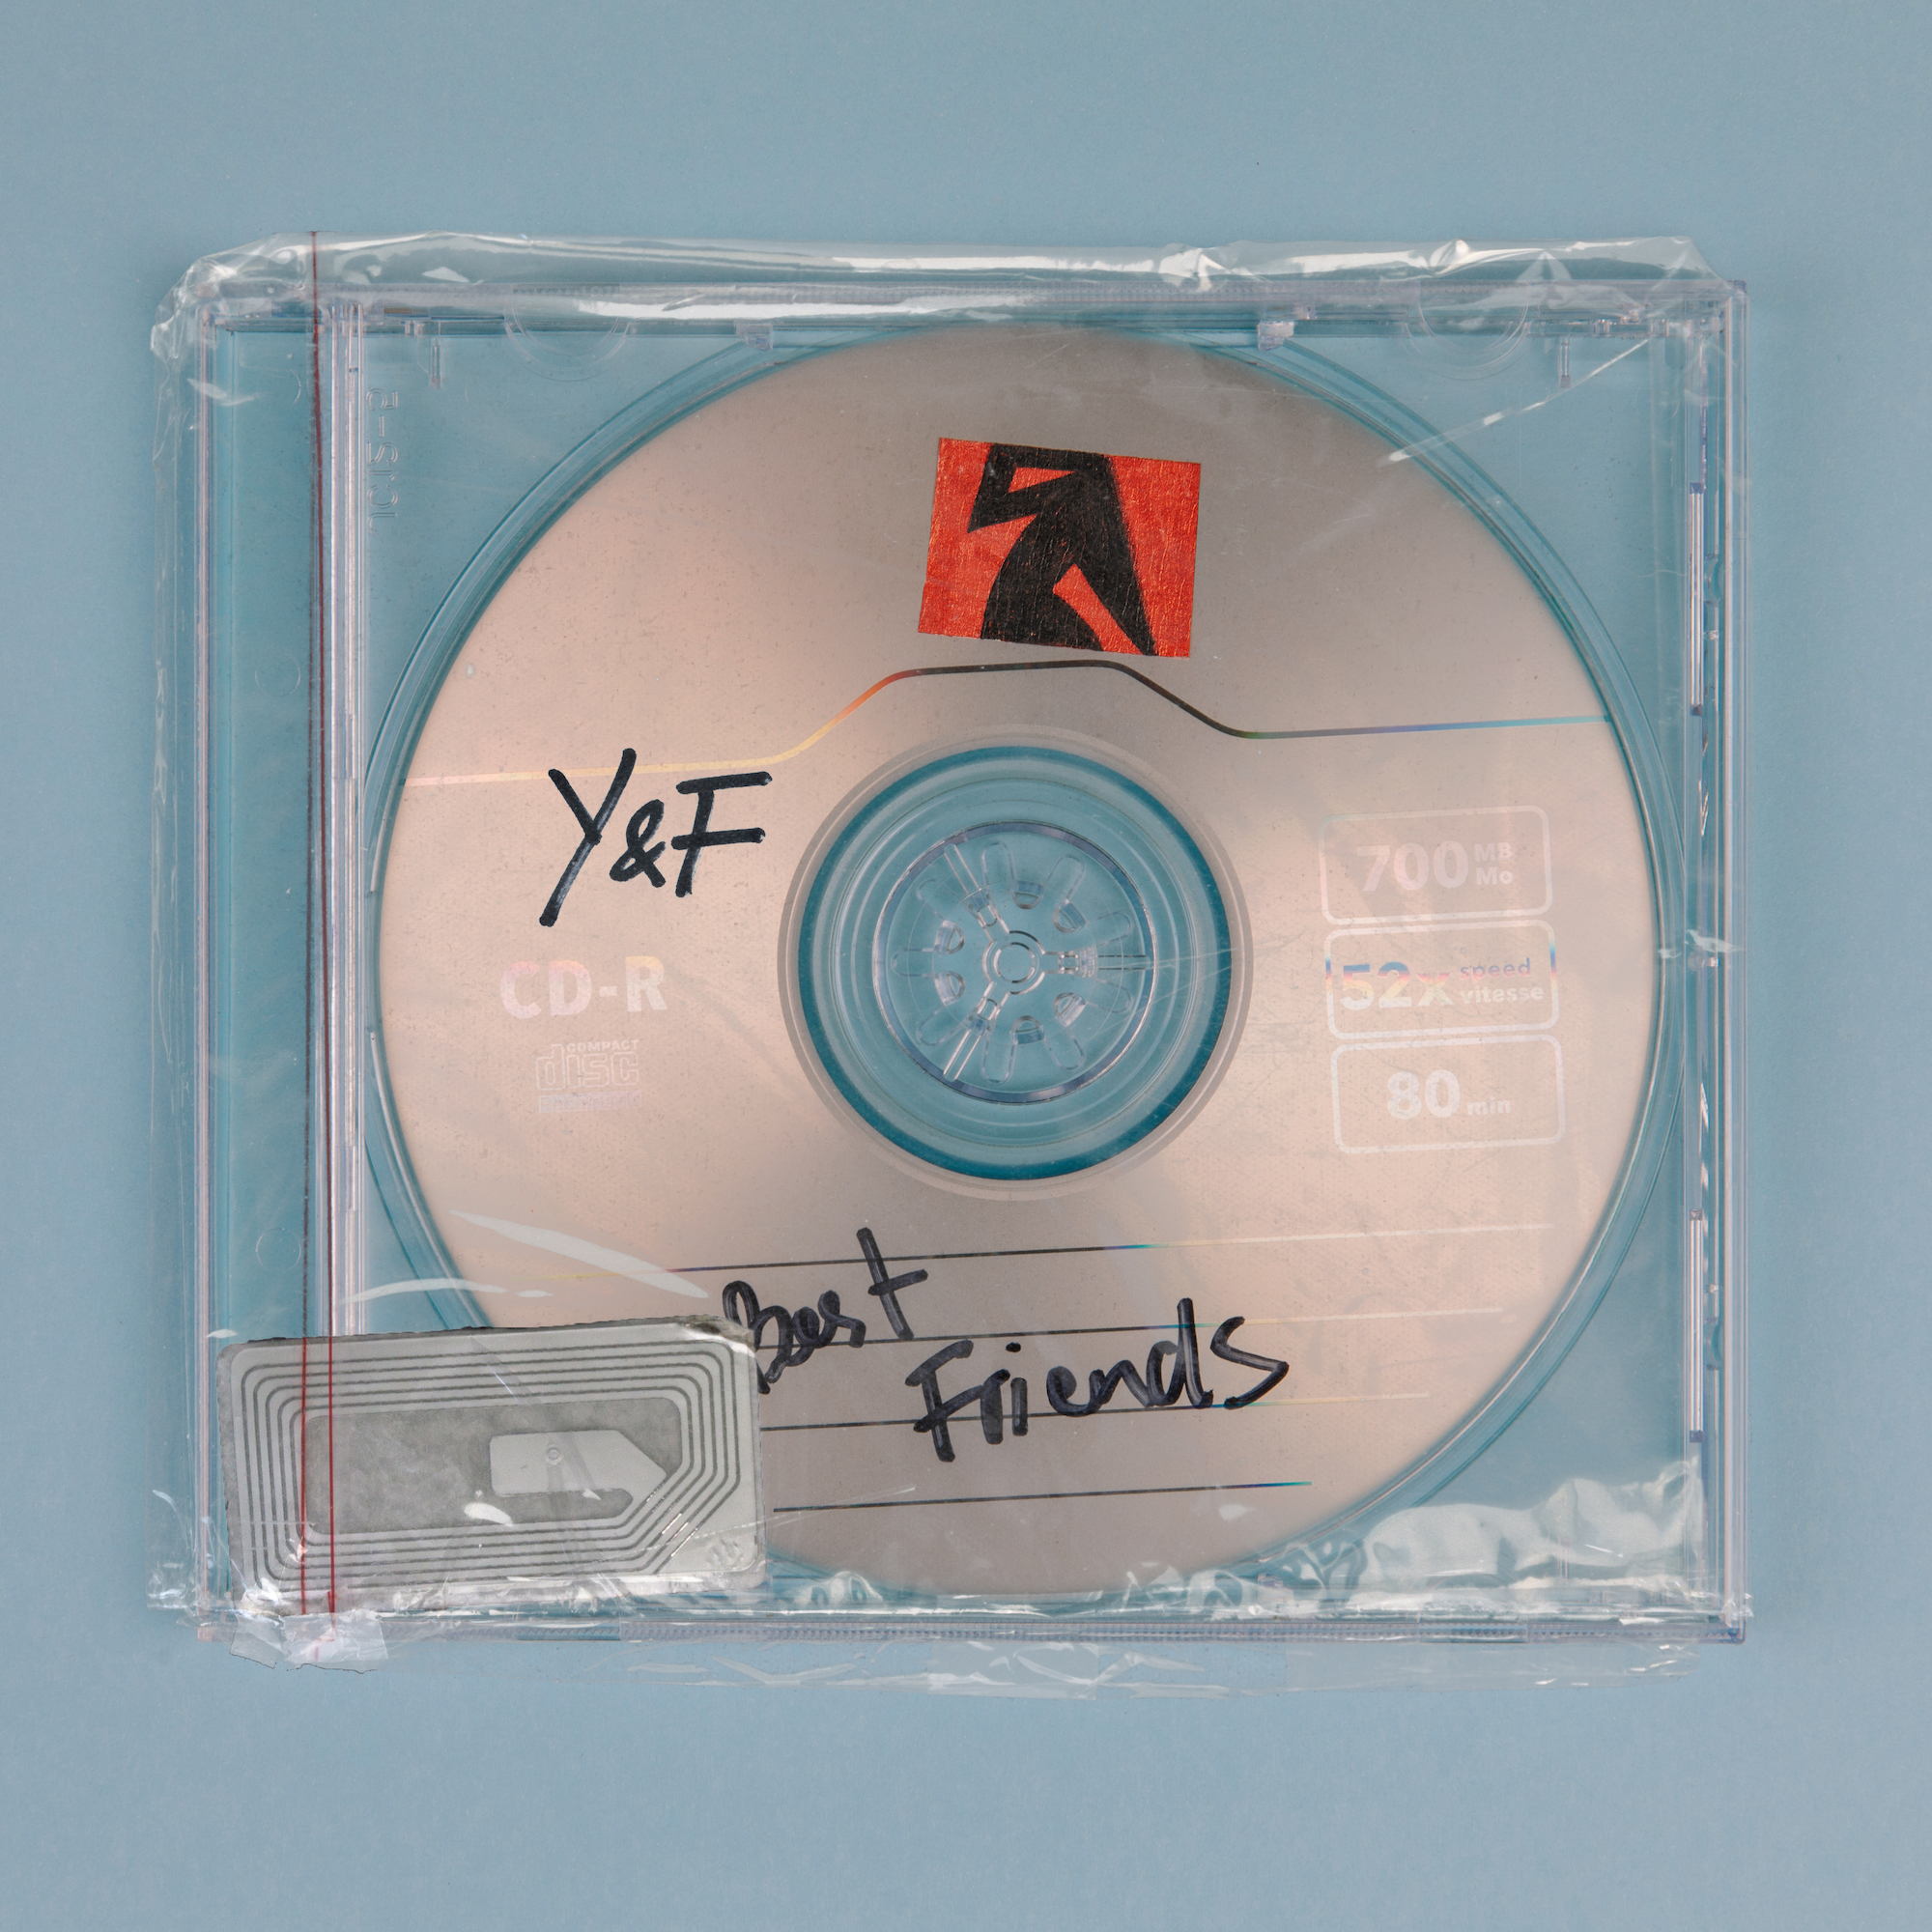 Hillsong Young & Free "Best Friends"